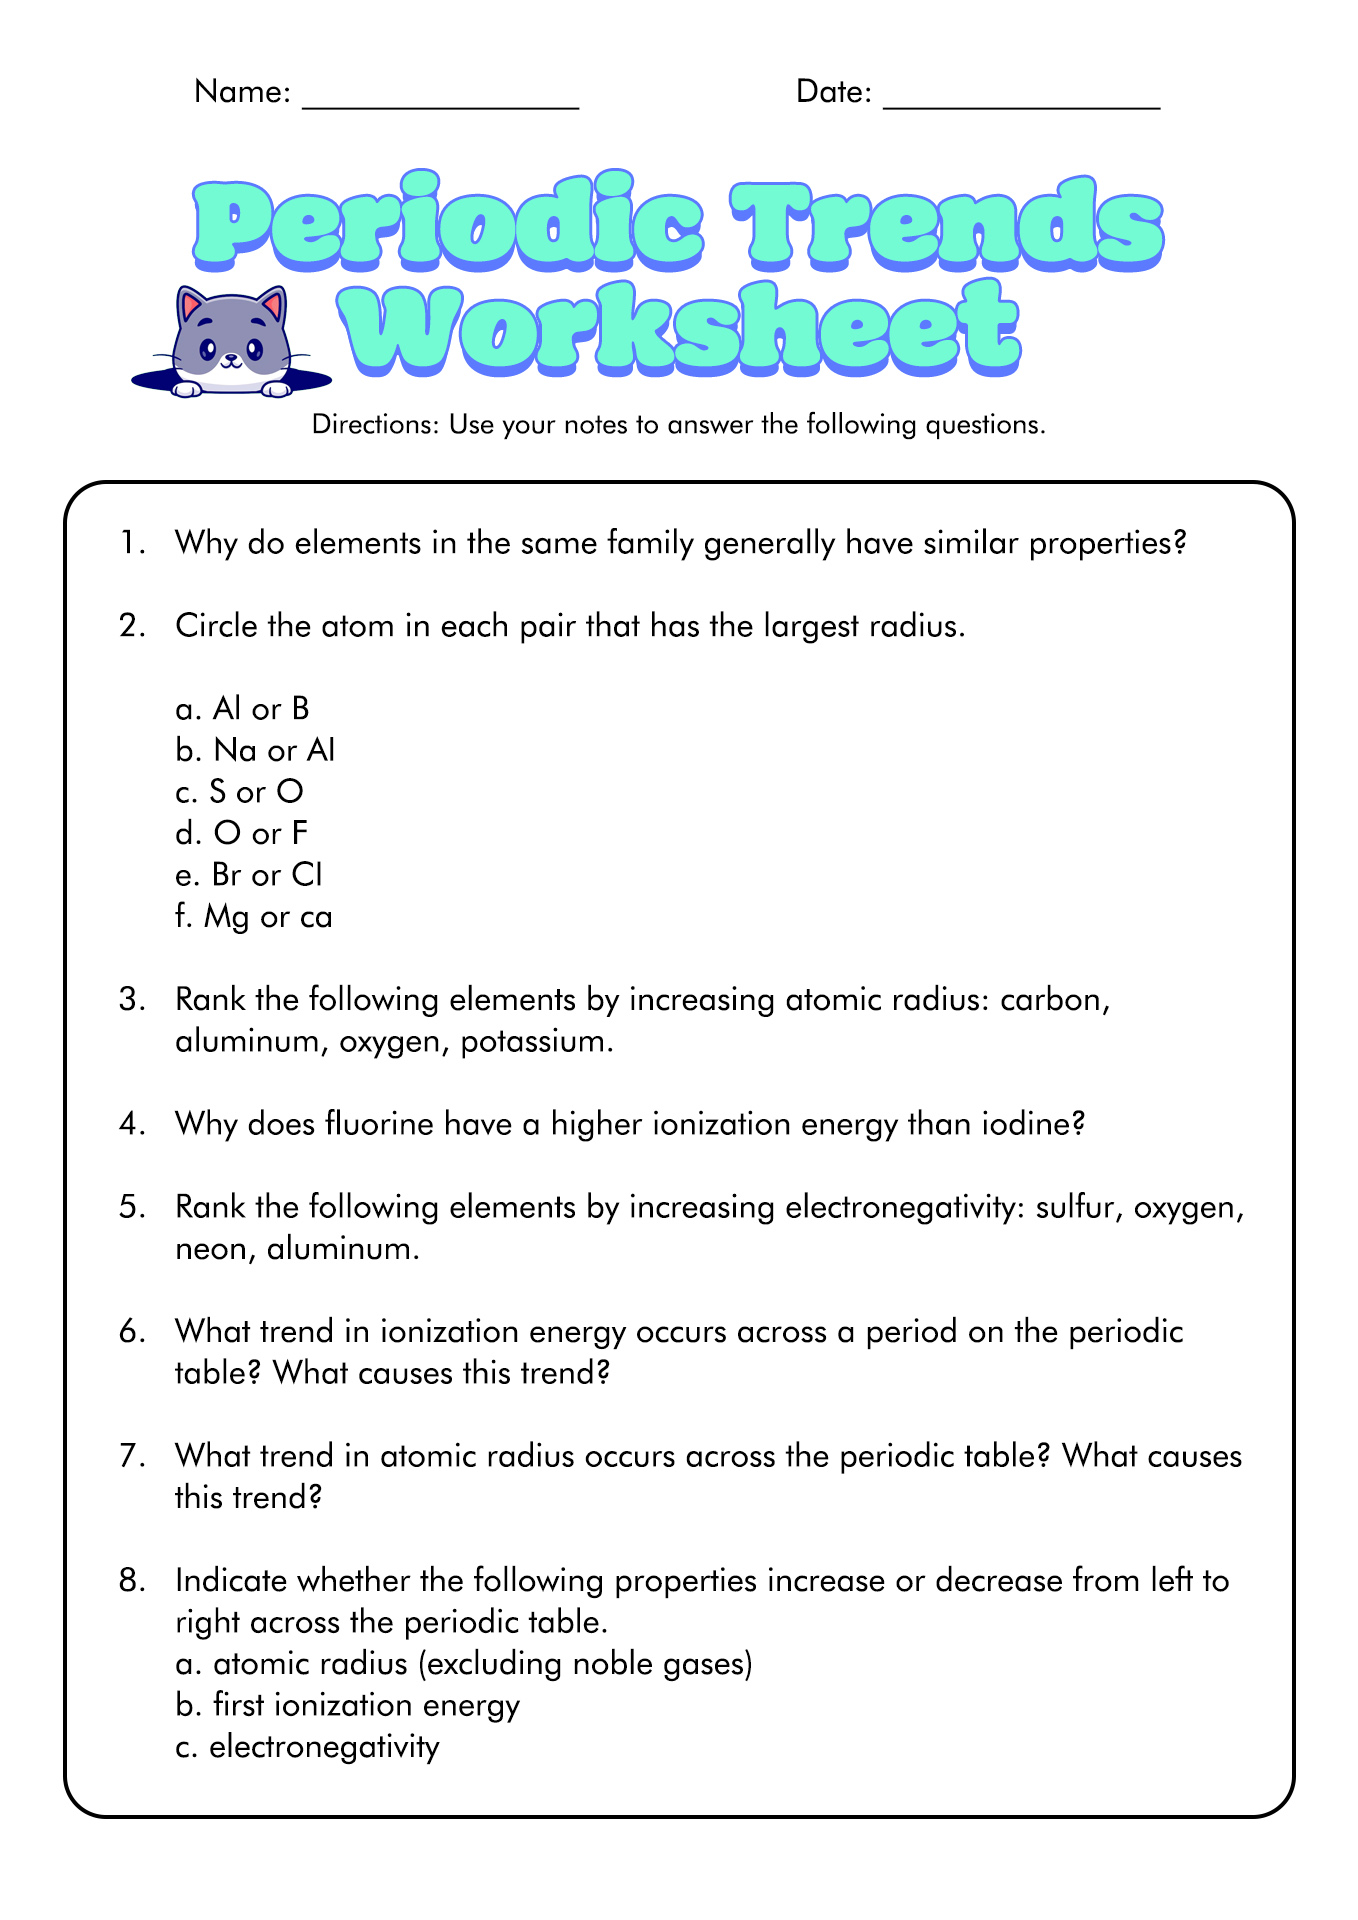 12 Best Images Of Periodic Table Worksheets PDF White Periodic Table Periodic Table Trends 